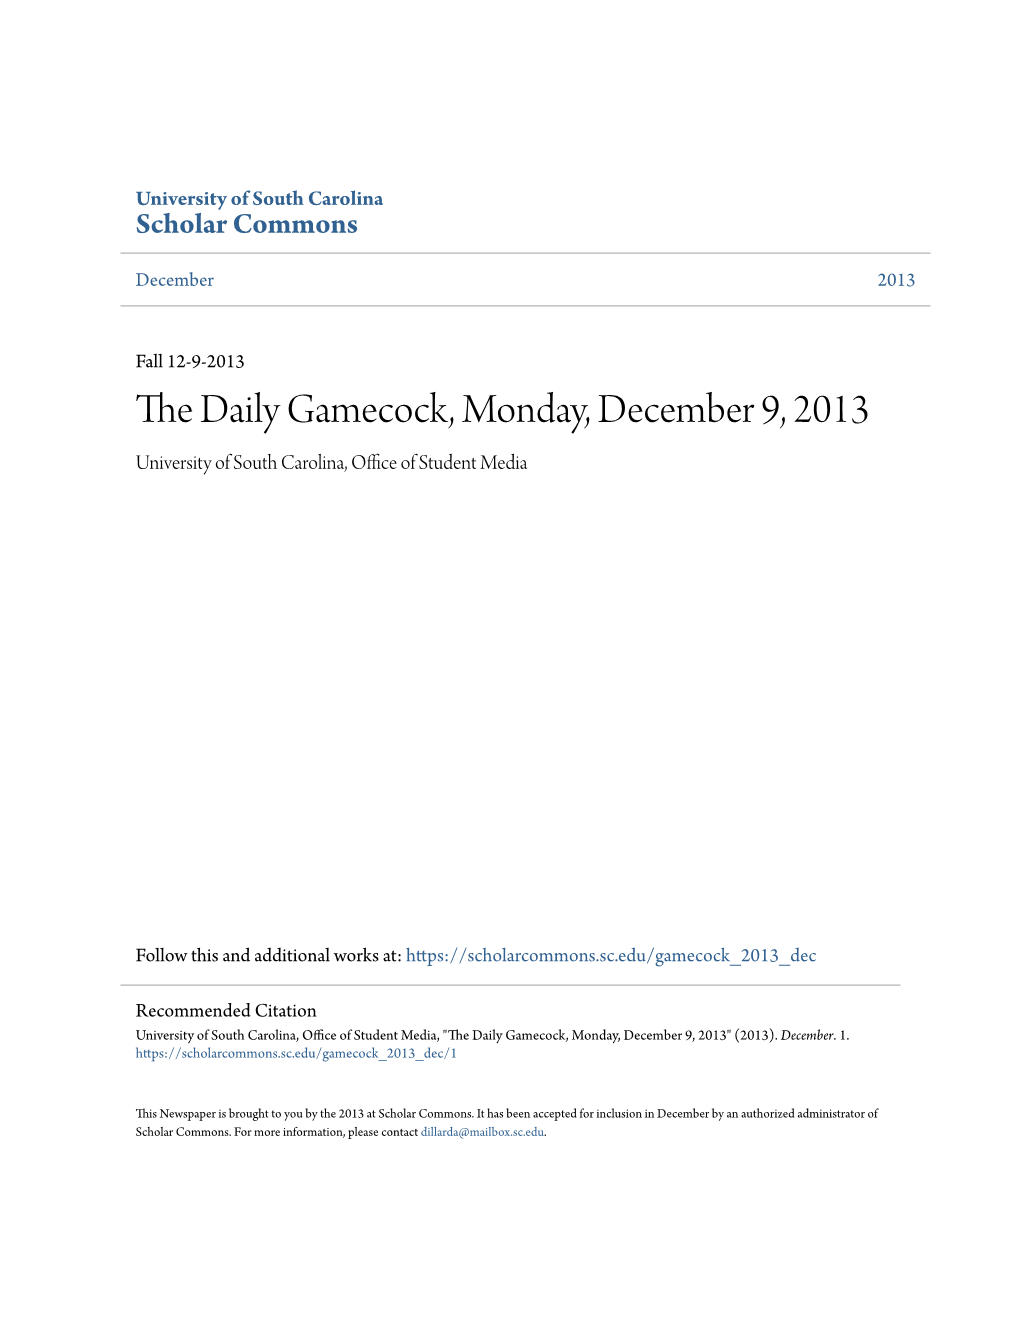 The Daily Gamecock, Monday, December 9, 2013